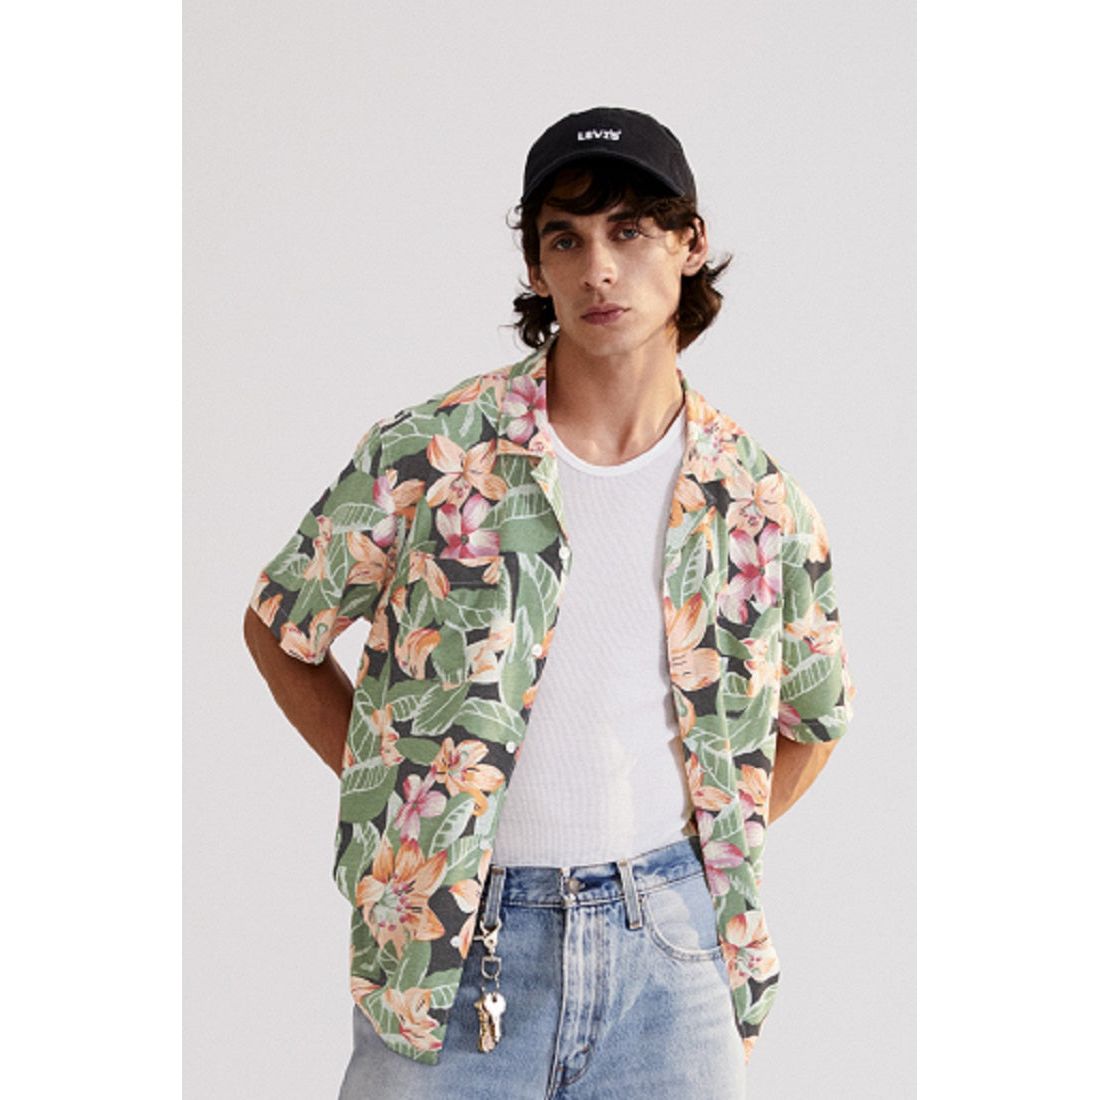 Levi's - Classic Camper Shirt in Andromede Tropical